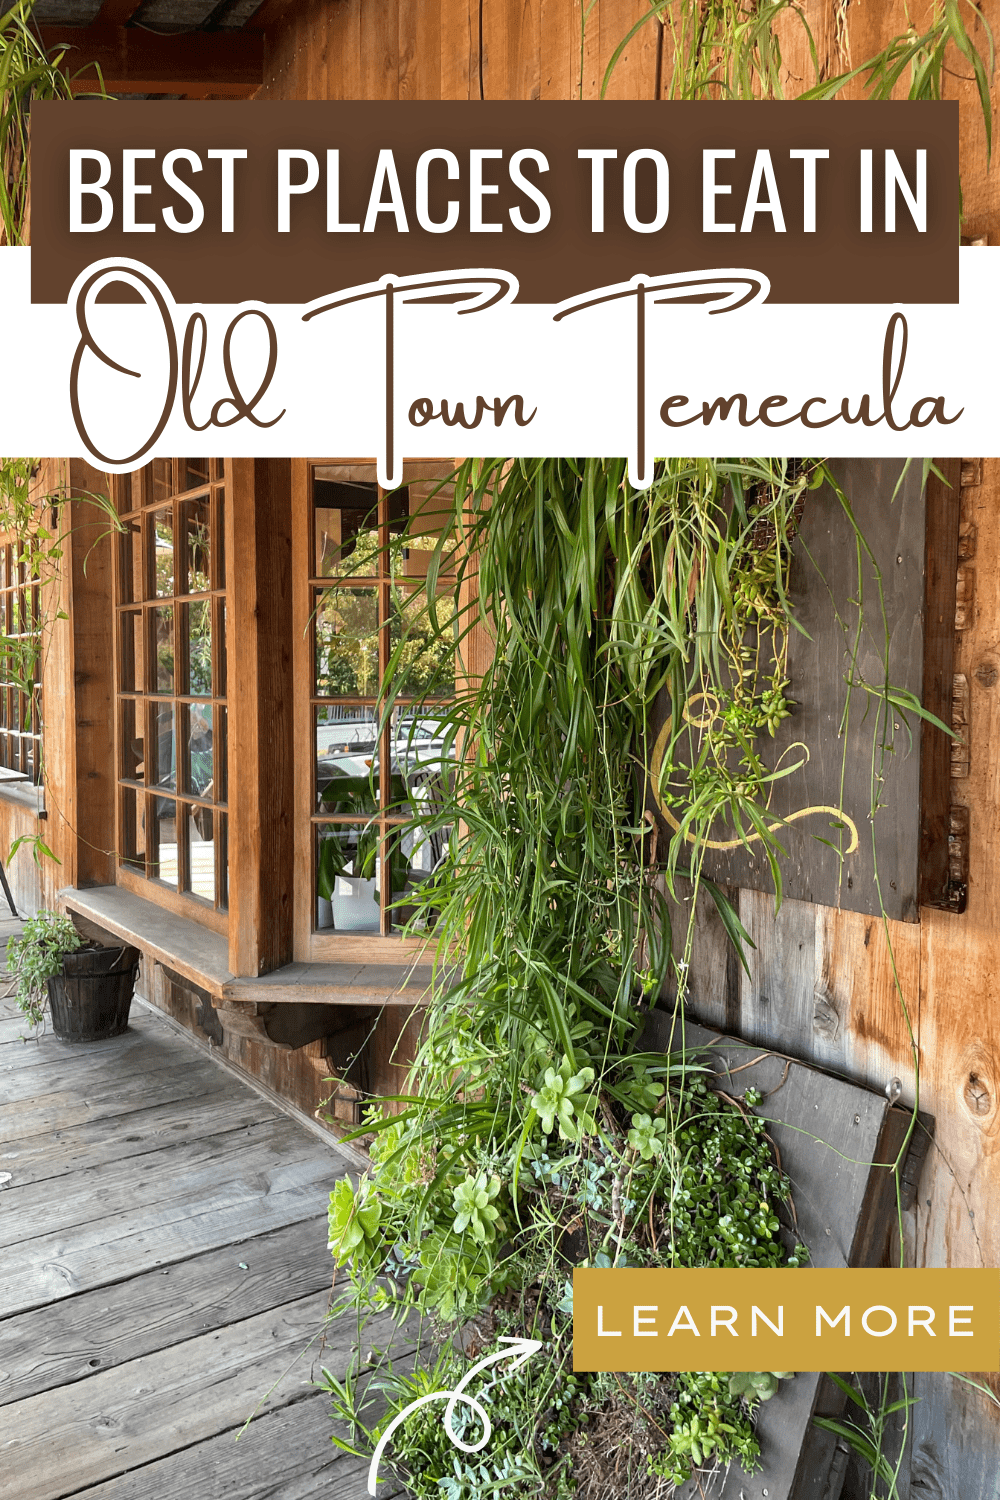 Best Places to Eat in Old Town Temecula